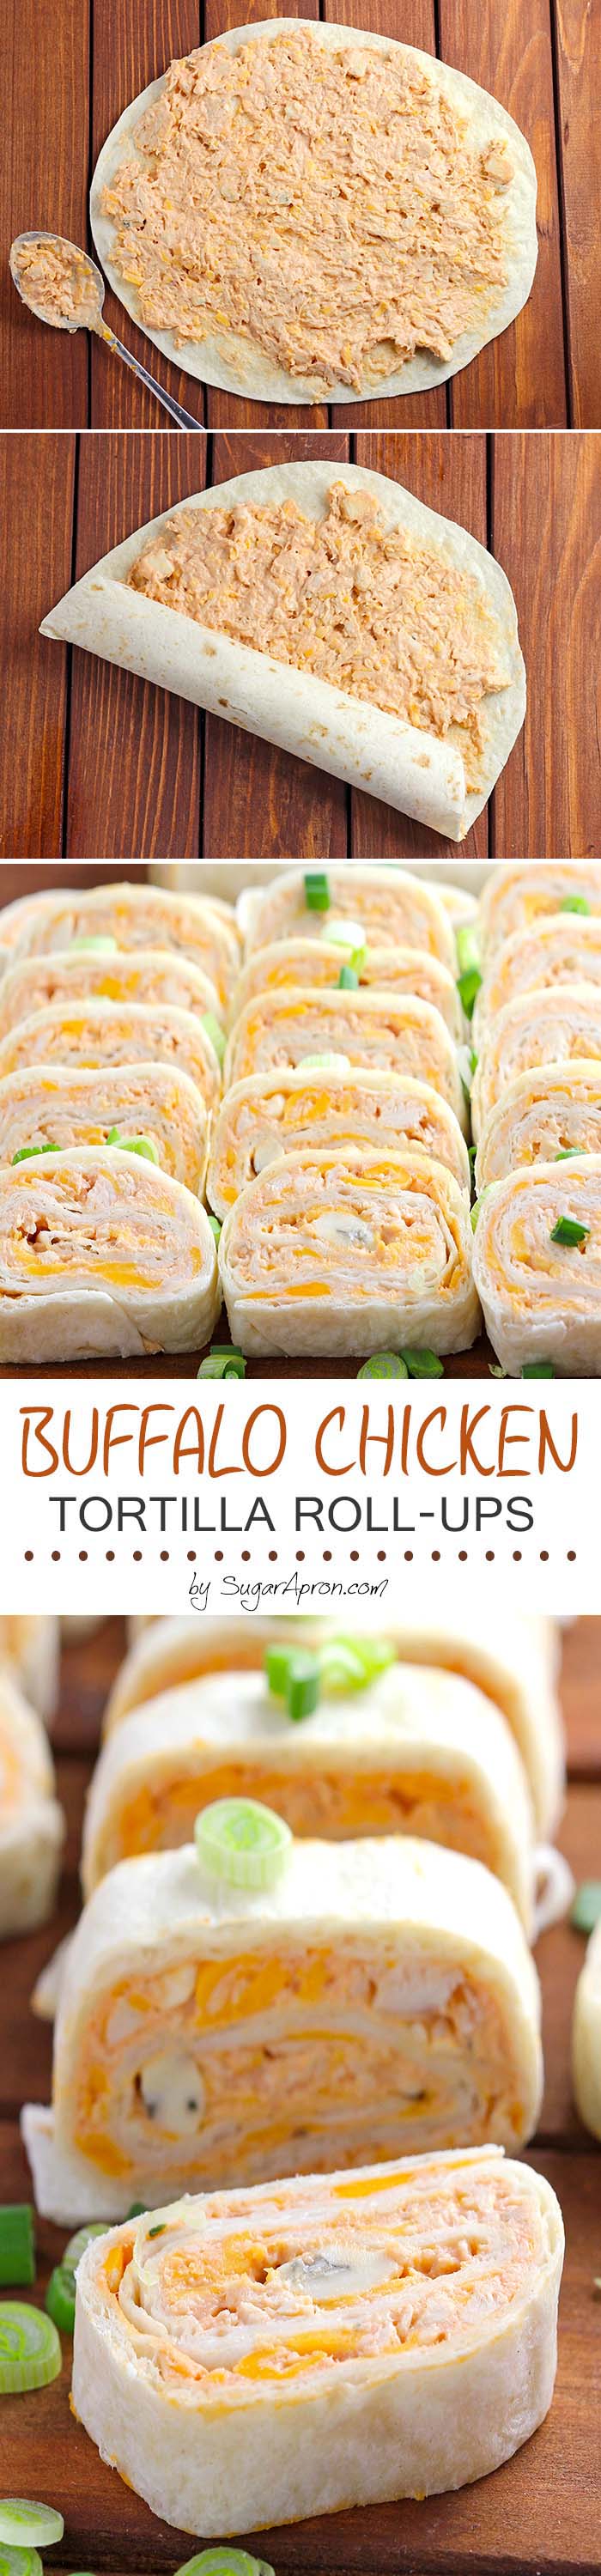  A Buffalo Chicken Tortilla Roll Ups recipe, perfect for game day....or any day!